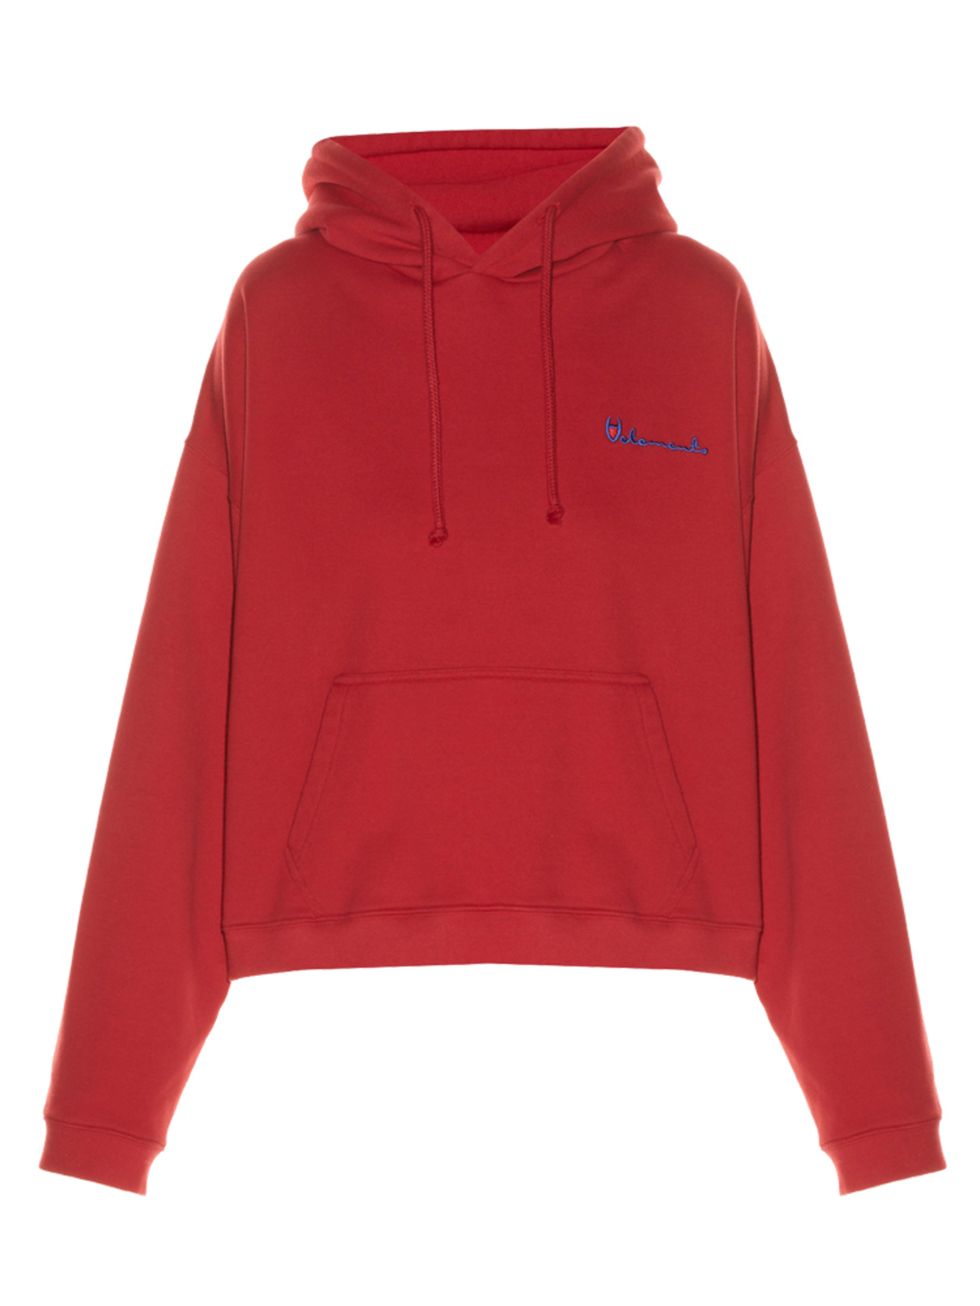 <p>Hooded logo-print sweatshirt, £415, <a href="http://www.matchesfashion.com/products/Vetements-Hooded-logo-print-sweatshirt-1046756" target="_blank">Vetements</a></p>